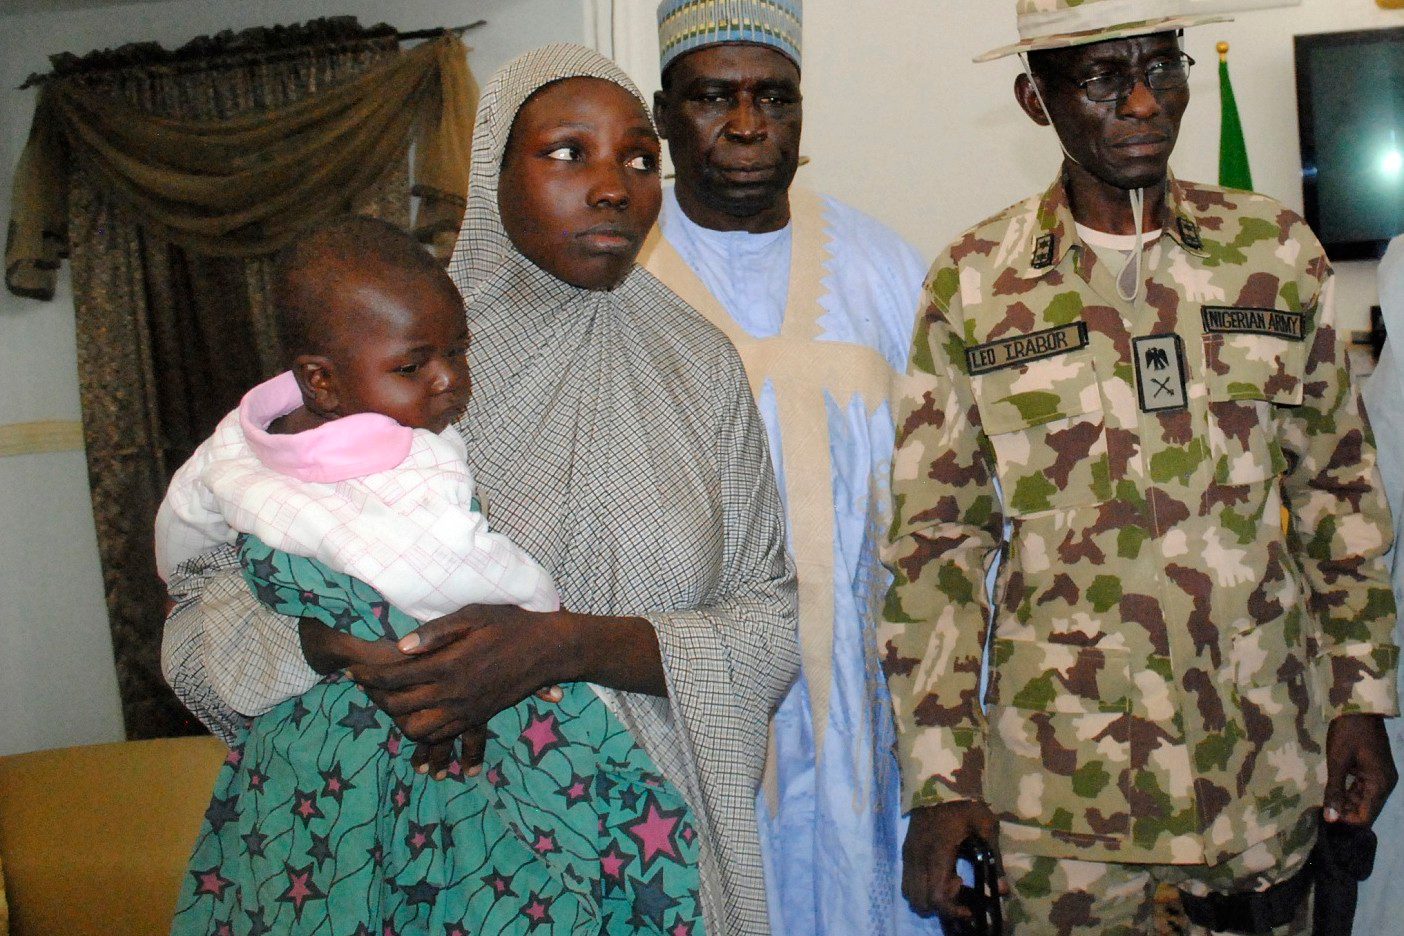 ten years after boko haram kidnapped hundreds of schoolgirls, nearly a third remain missing